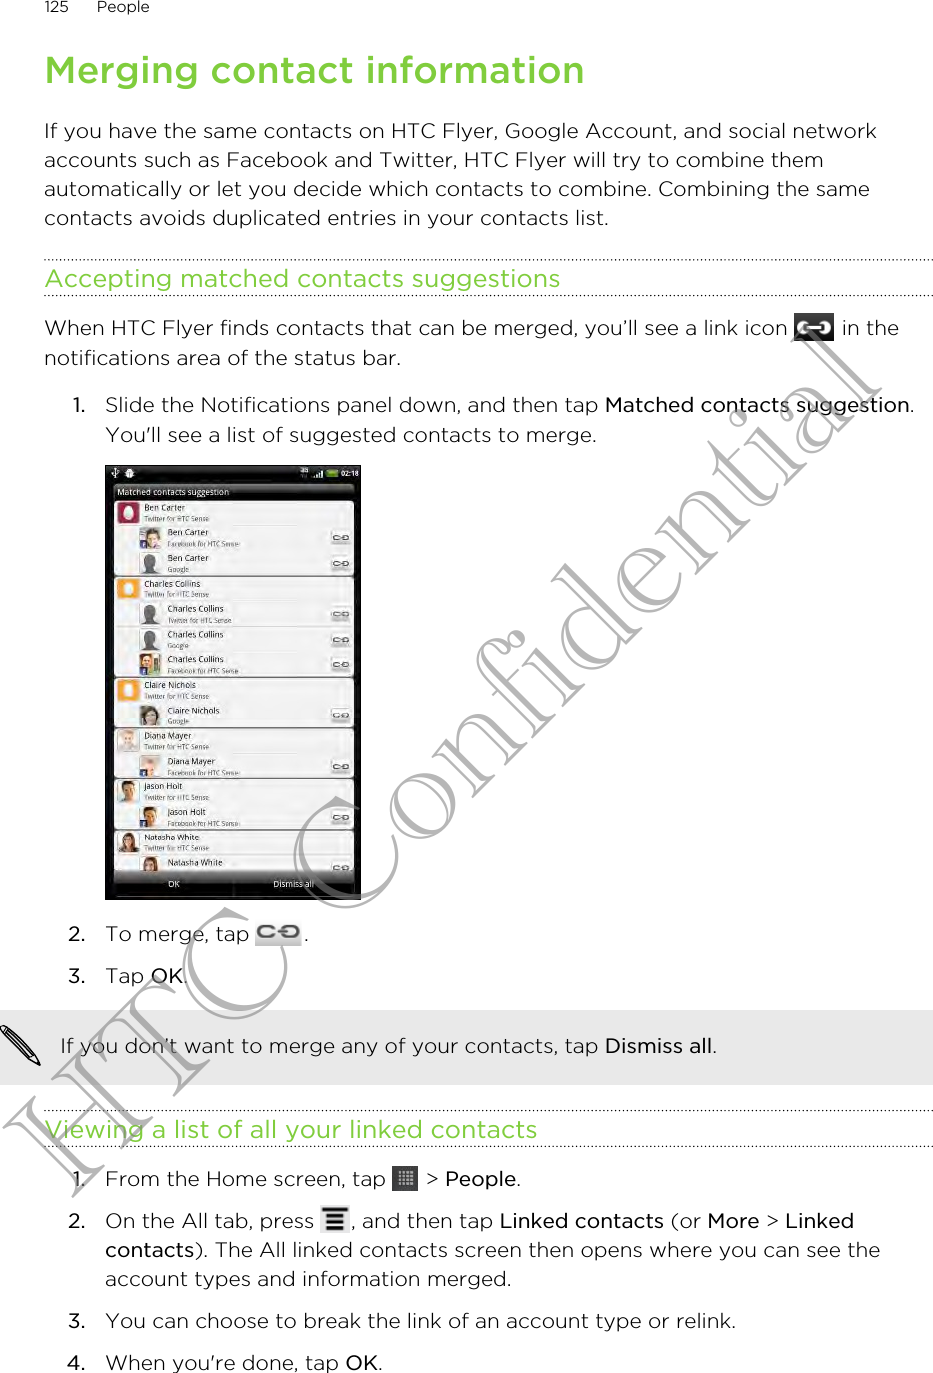 Merging contact informationIf you have the same contacts on HTC Flyer, Google Account, and social networkaccounts such as Facebook and Twitter, HTC Flyer will try to combine themautomatically or let you decide which contacts to combine. Combining the samecontacts avoids duplicated entries in your contacts list.Accepting matched contacts suggestionsWhen HTC Flyer finds contacts that can be merged, you’ll see a link icon   in thenotifications area of the status bar.1. Slide the Notifications panel down, and then tap Matched contacts suggestion.You&apos;ll see a list of suggested contacts to merge.2. To merge, tap  .3. Tap OK.If you don’t want to merge any of your contacts, tap Dismiss all.Viewing a list of all your linked contacts1. From the Home screen, tap   &gt; People.2. On the All tab, press  , and then tap Linked contacts (or More &gt; Linkedcontacts). The All linked contacts screen then opens where you can see theaccount types and information merged.3. You can choose to break the link of an account type or relink.4. When you&apos;re done, tap OK.125 PeopleHTC Confidential